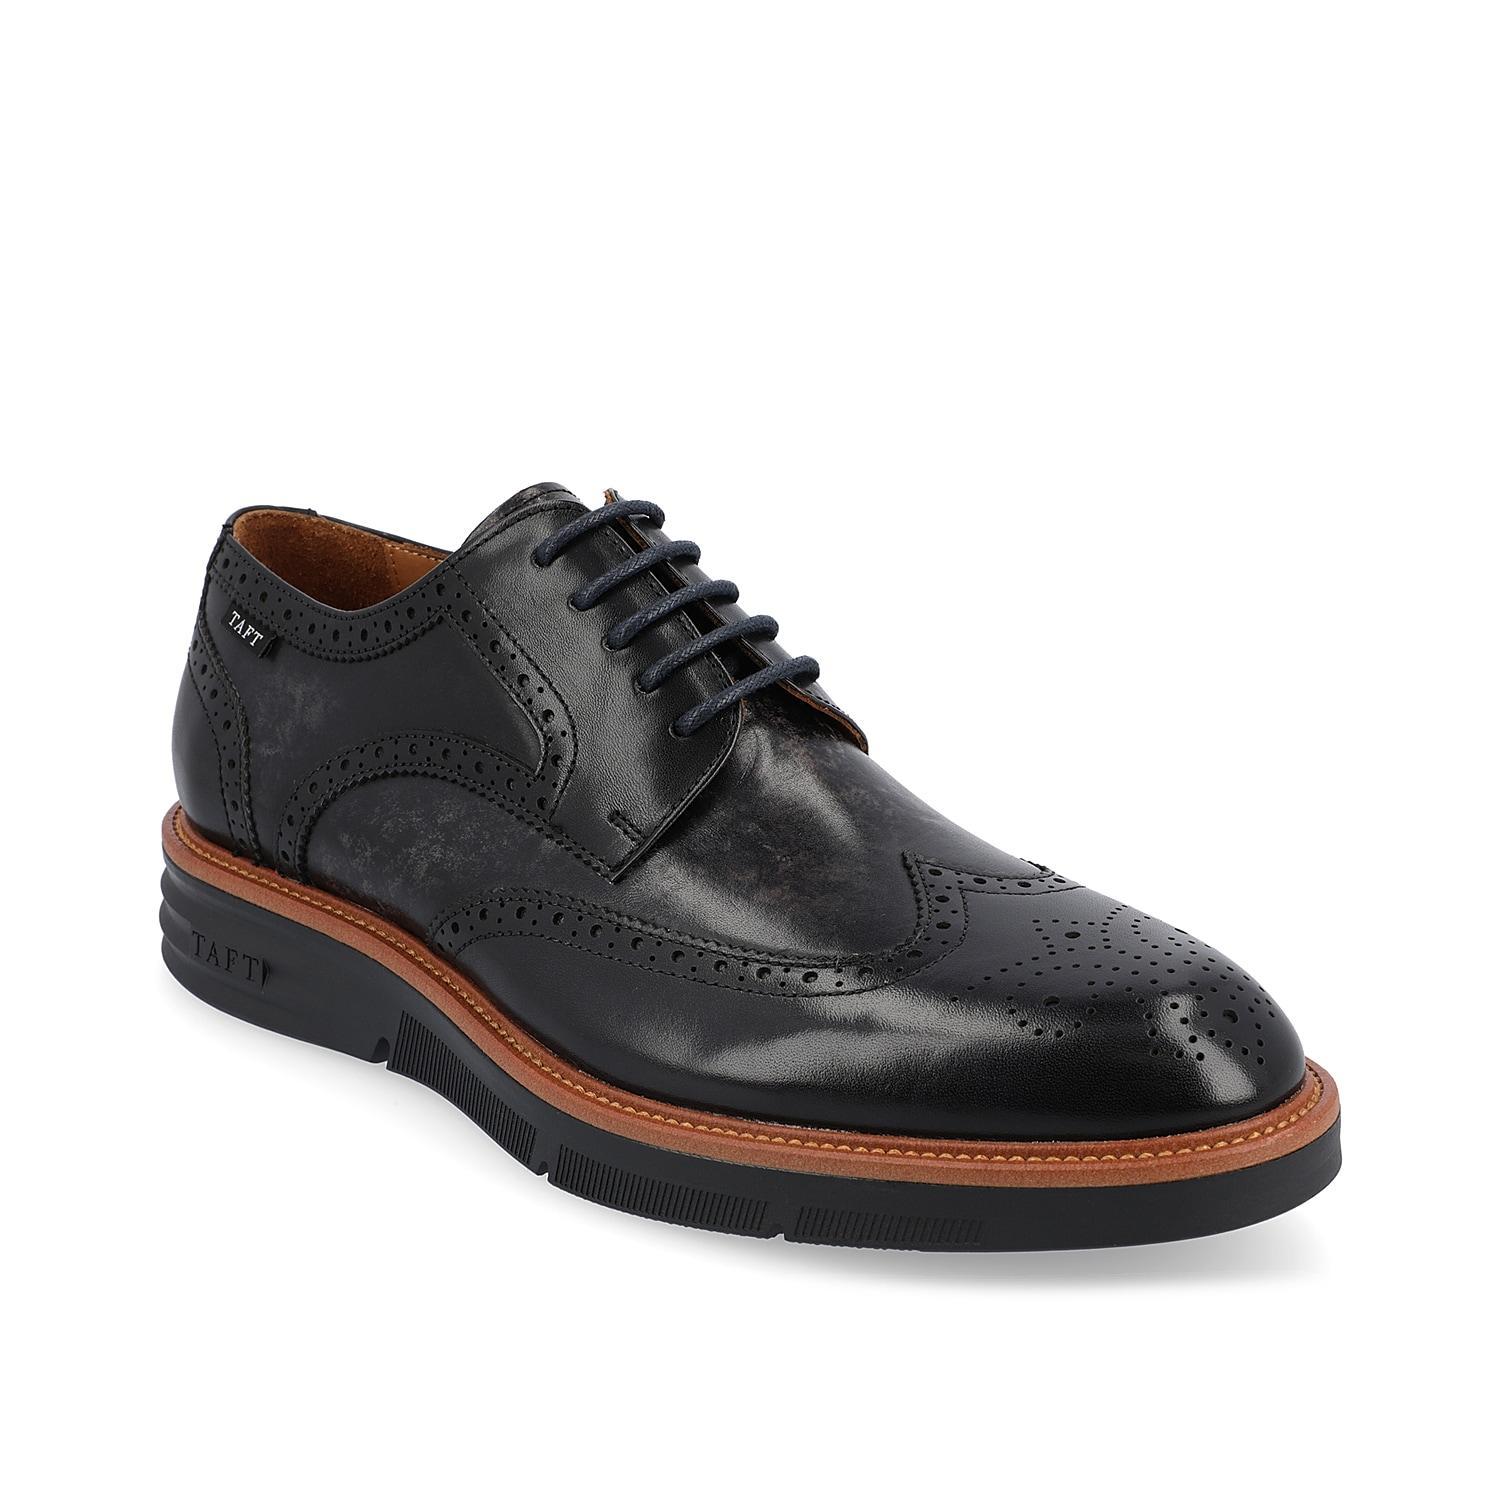 TAFT 365 Leather Wingtip Derby Product Image